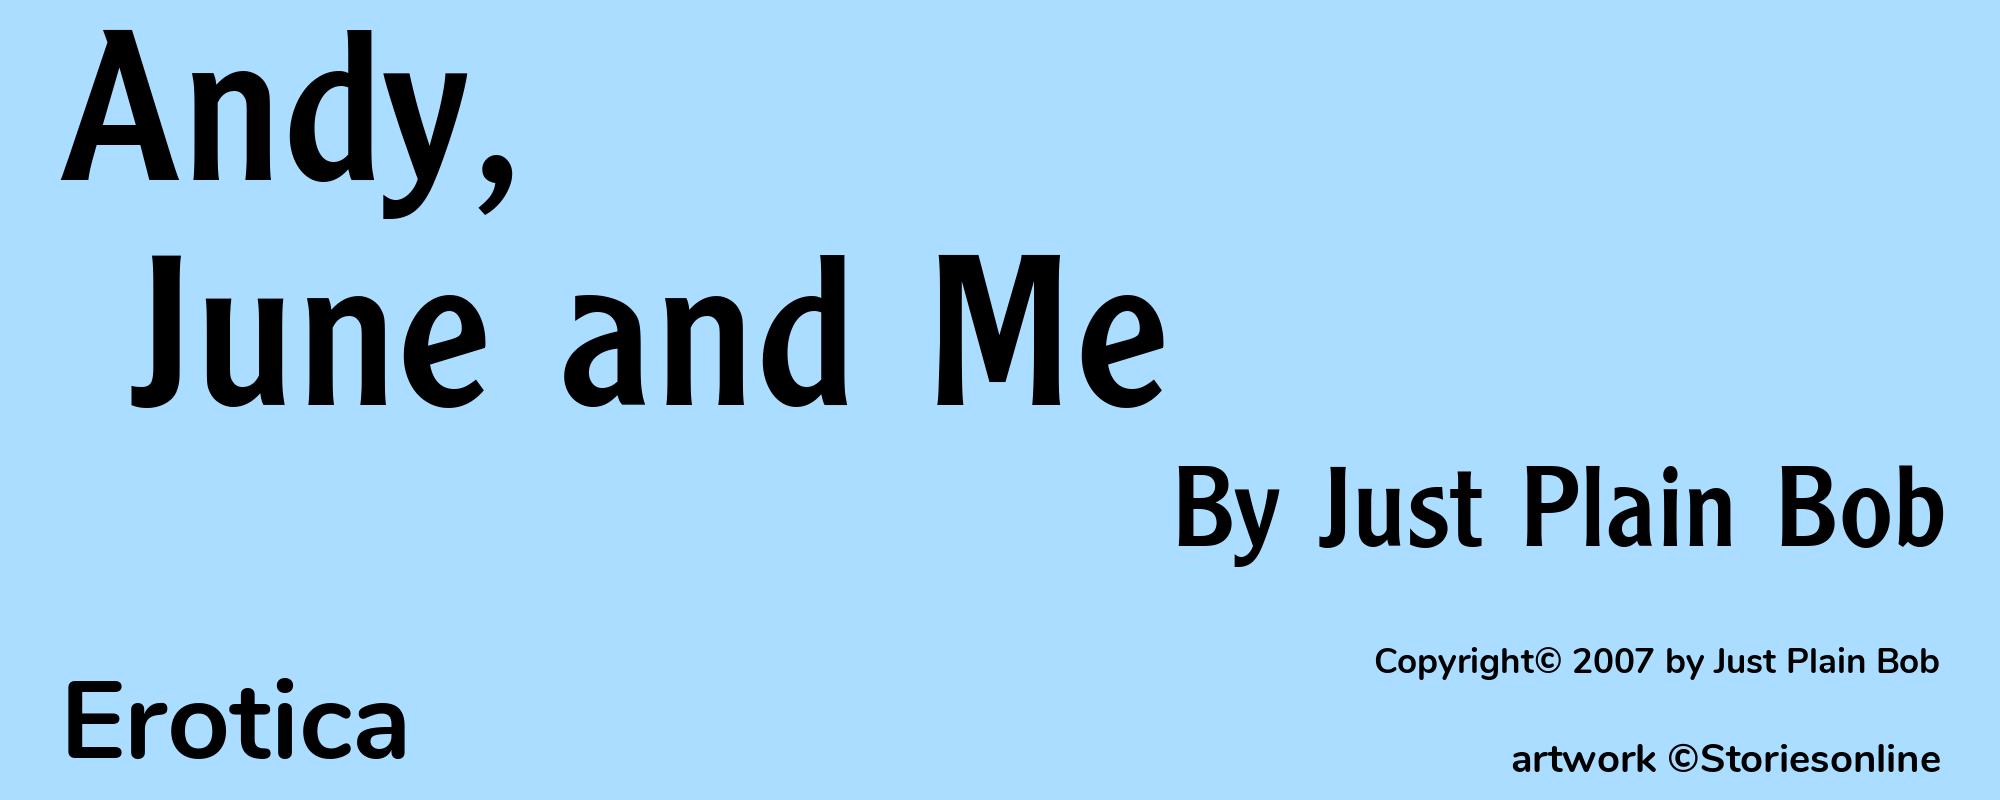 Andy, June and Me - Cover